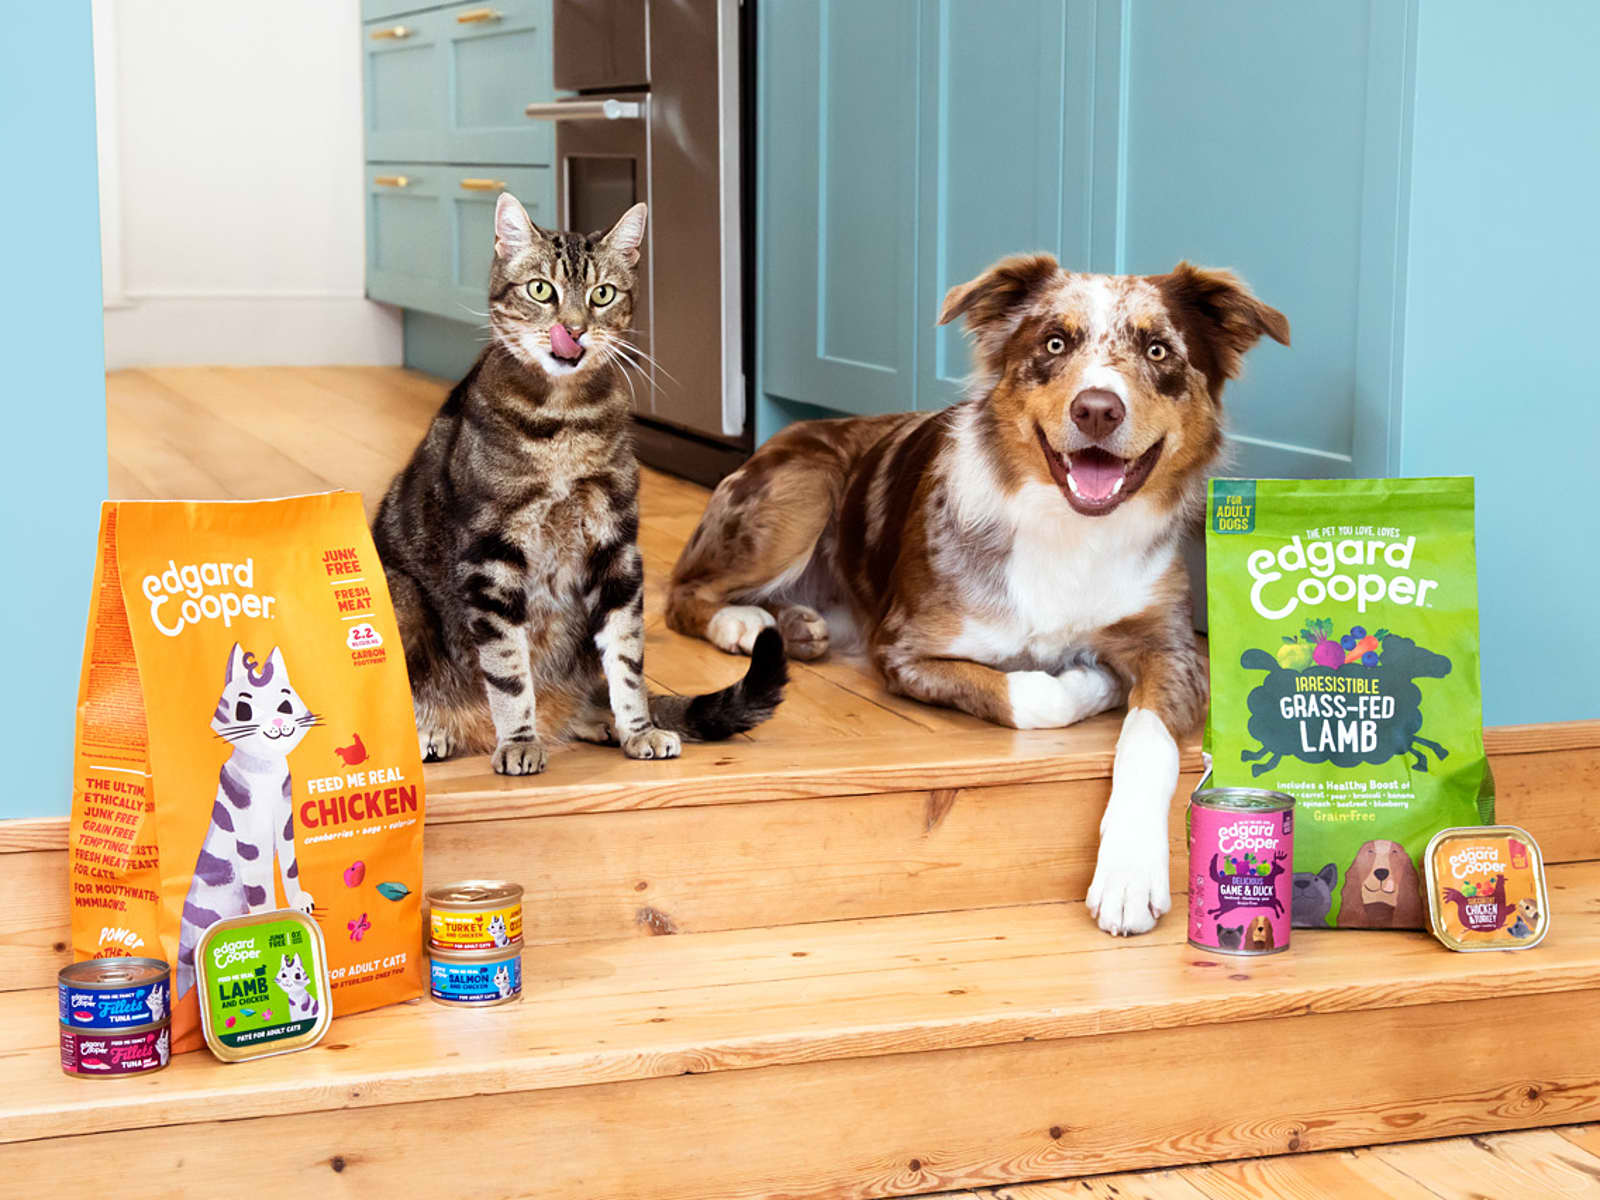 Cat and dog surrounded by Edgard and Cooper products